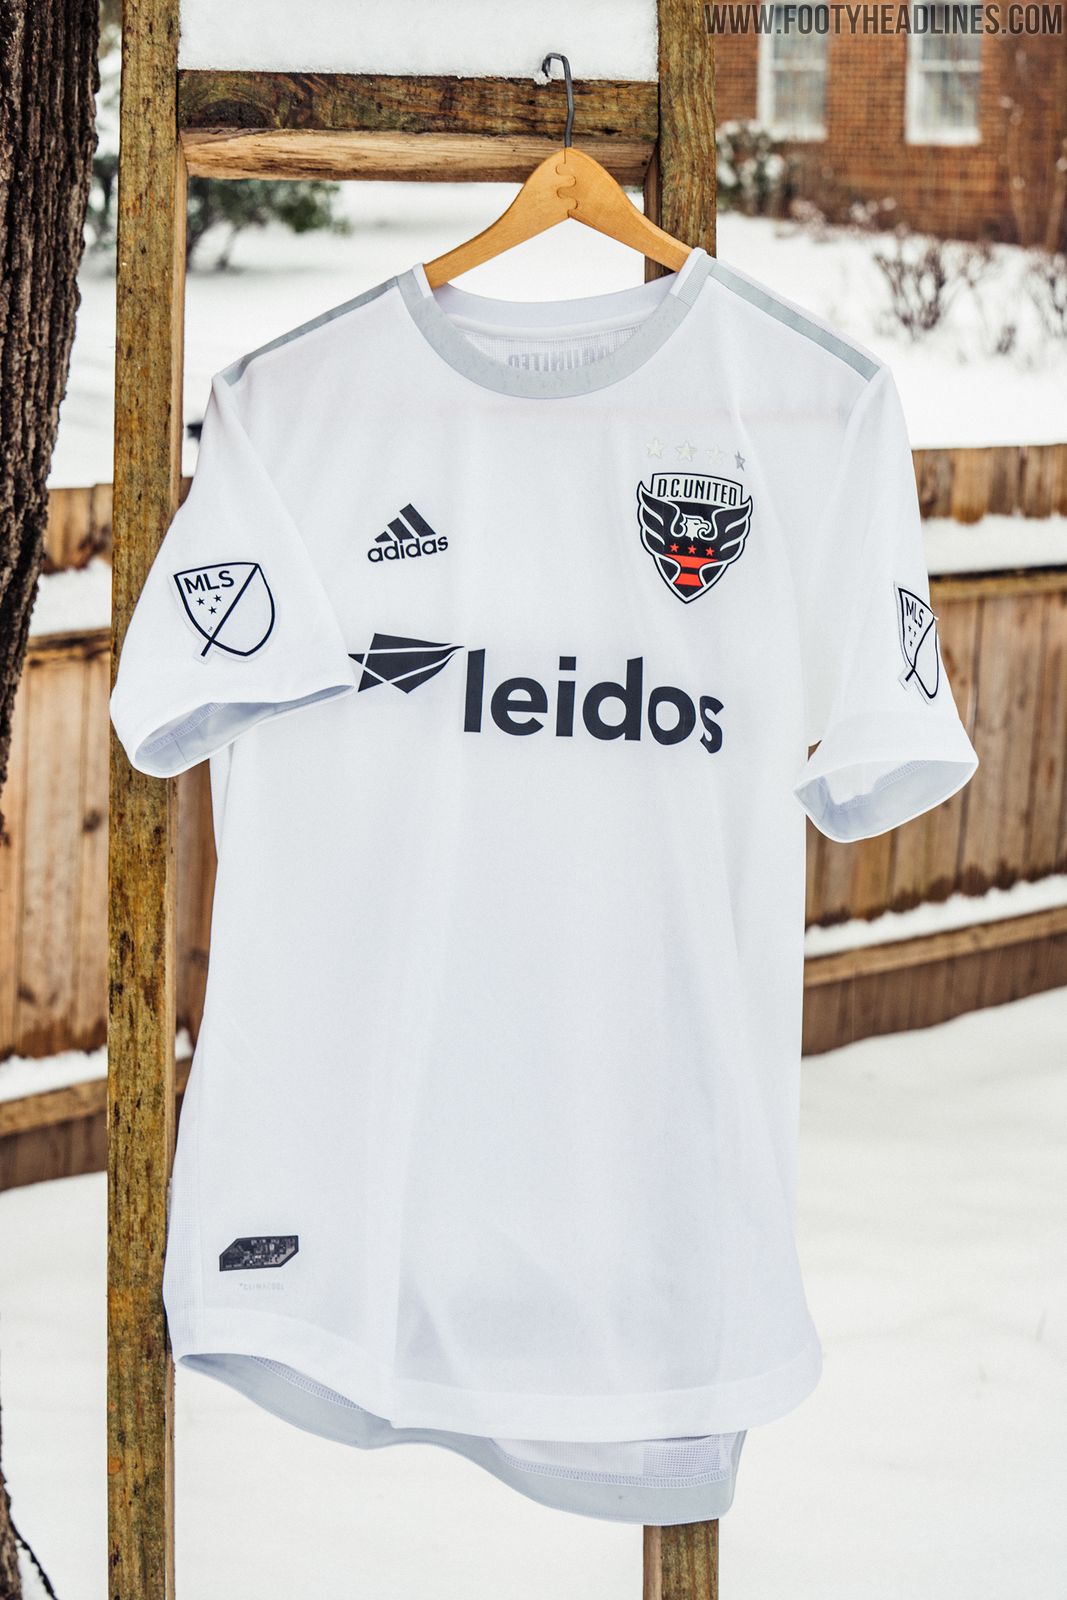 adidas Launch The MLS All Star 2019 Jersey - SoccerBible